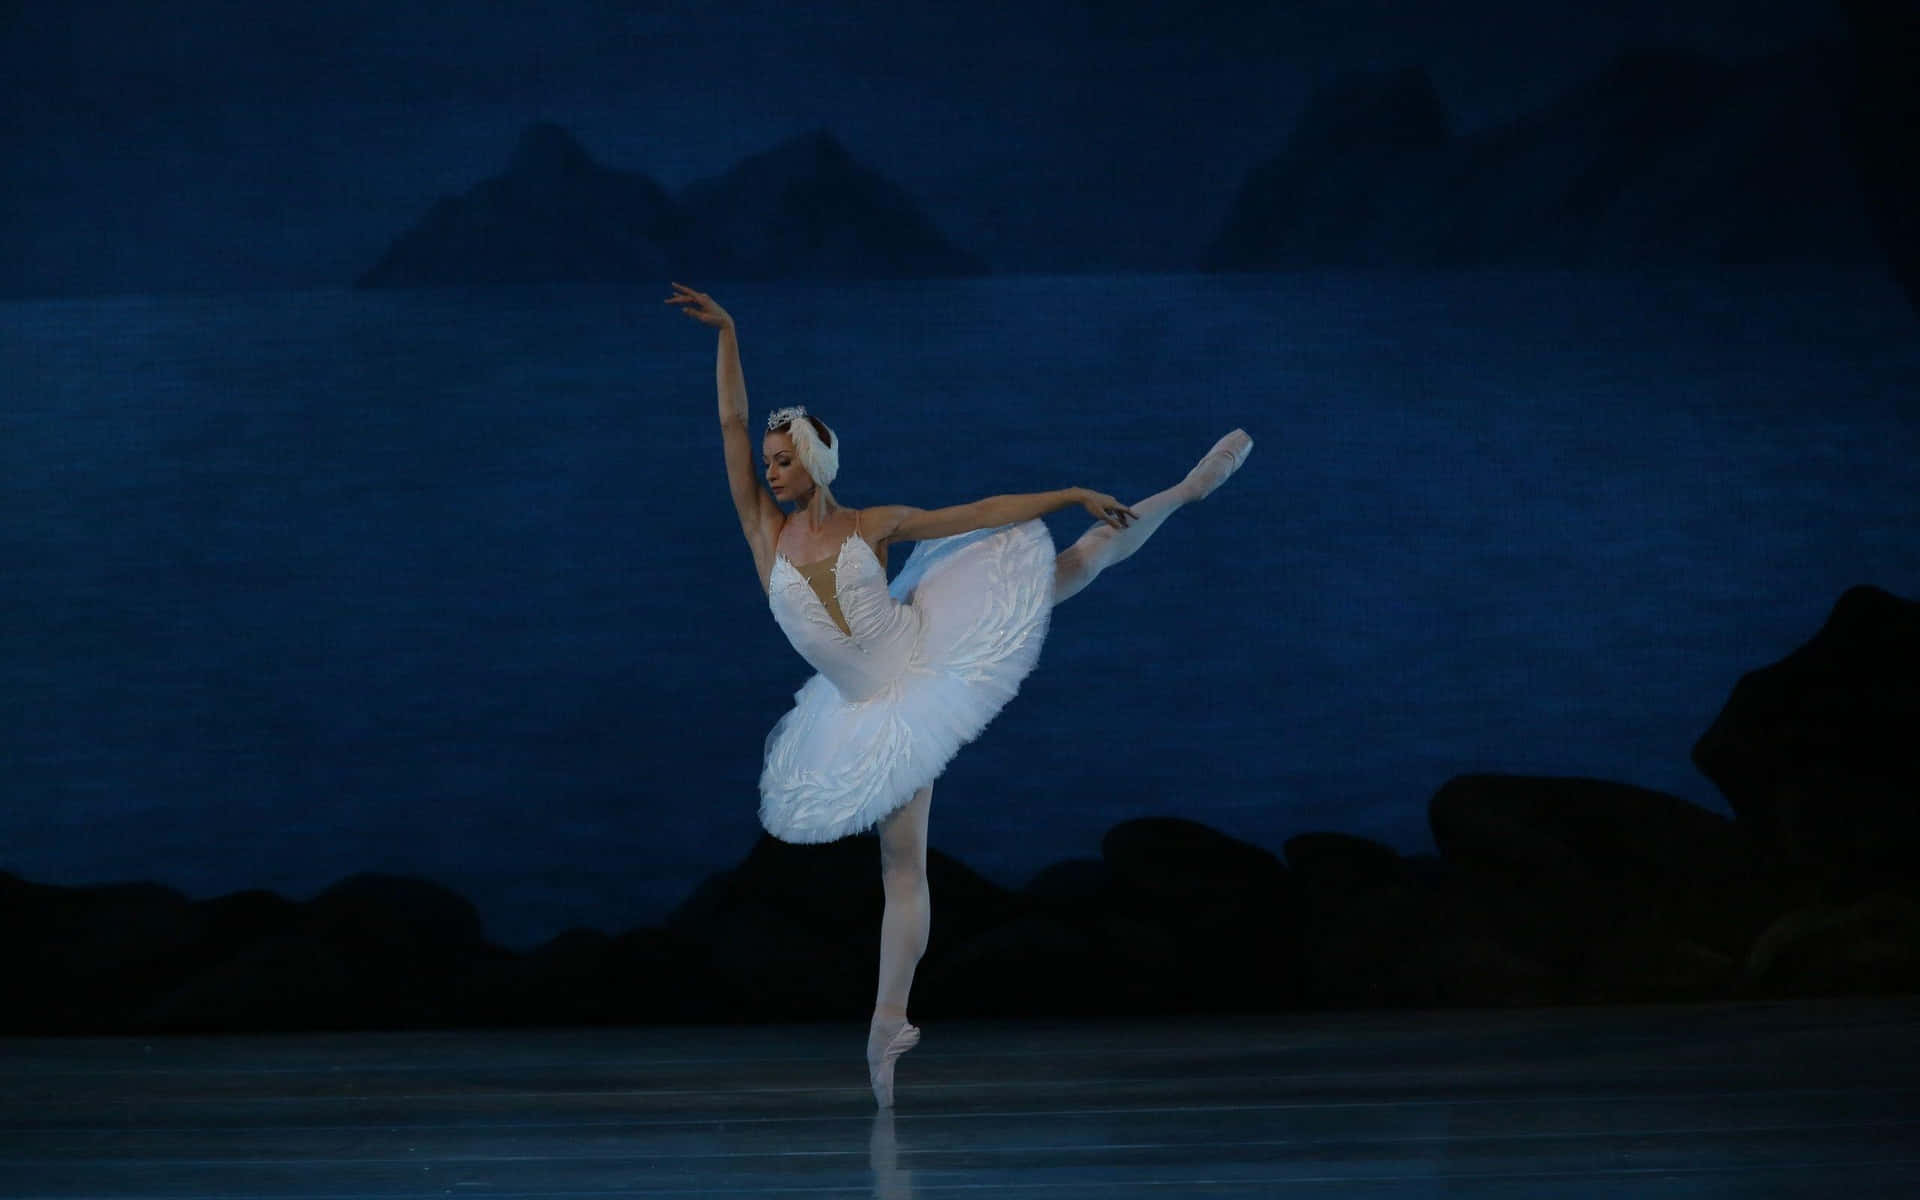 A poised ballerina practices her pirouette in a studio.